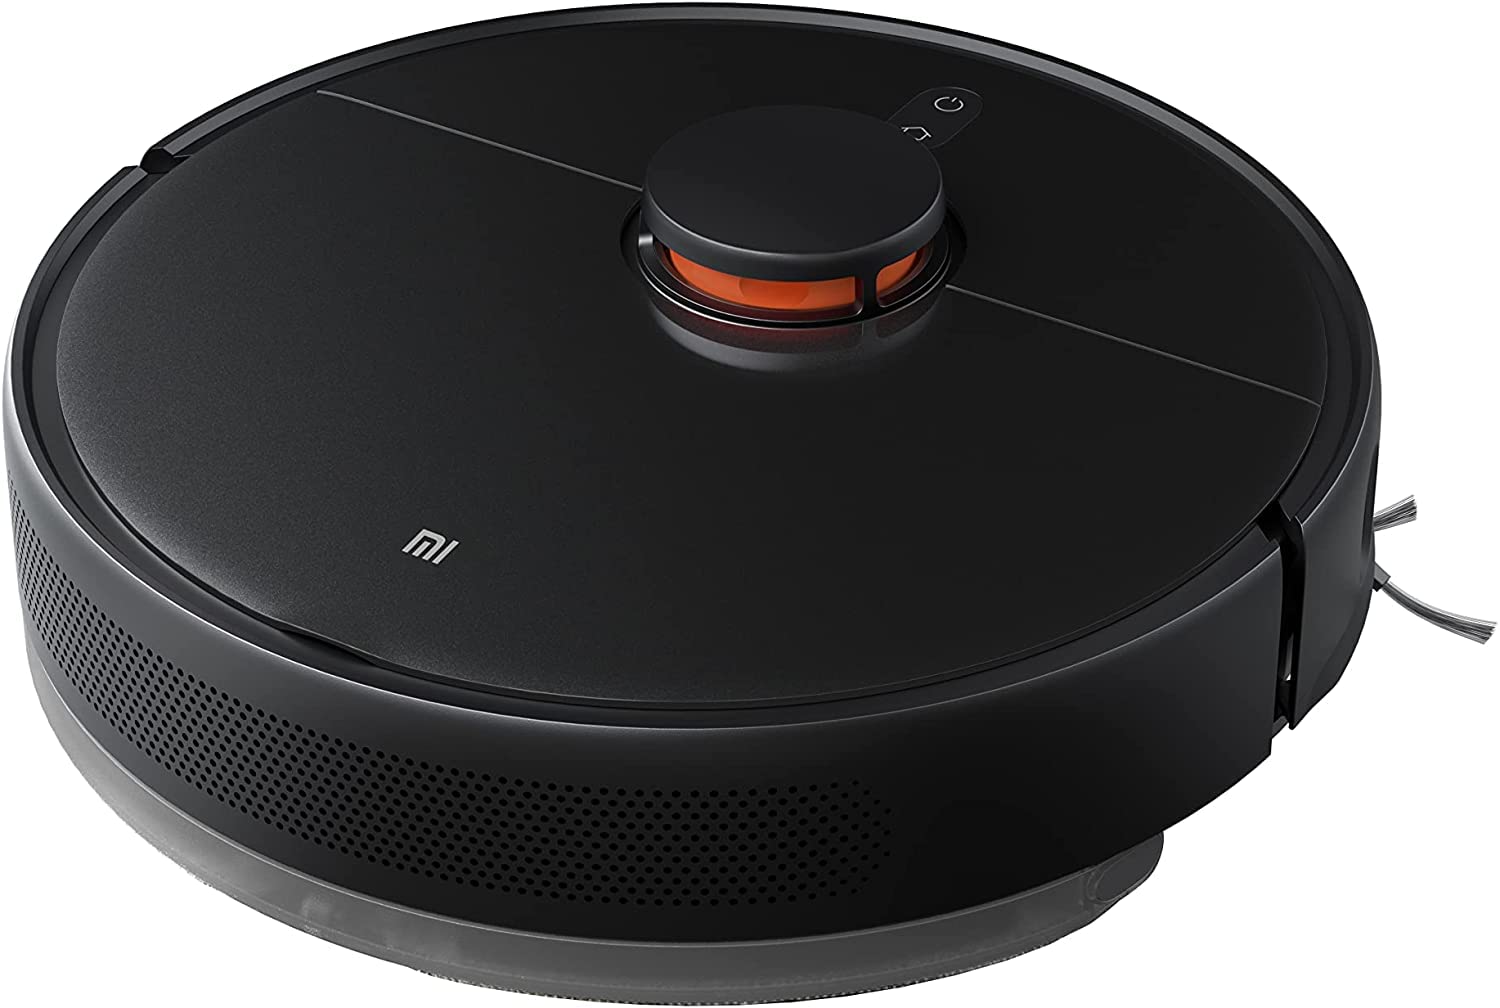 Xiaomi Mi Home Vacuum Mop 2 Ultra Robot Vacuum Cleaner 2 in 1 Sweeping Mopping Lds Navigation 4000Pa | مشکی | Bhr5195EU , Mi Home Robot Vacuum Cleaner 2 In 1 – Black